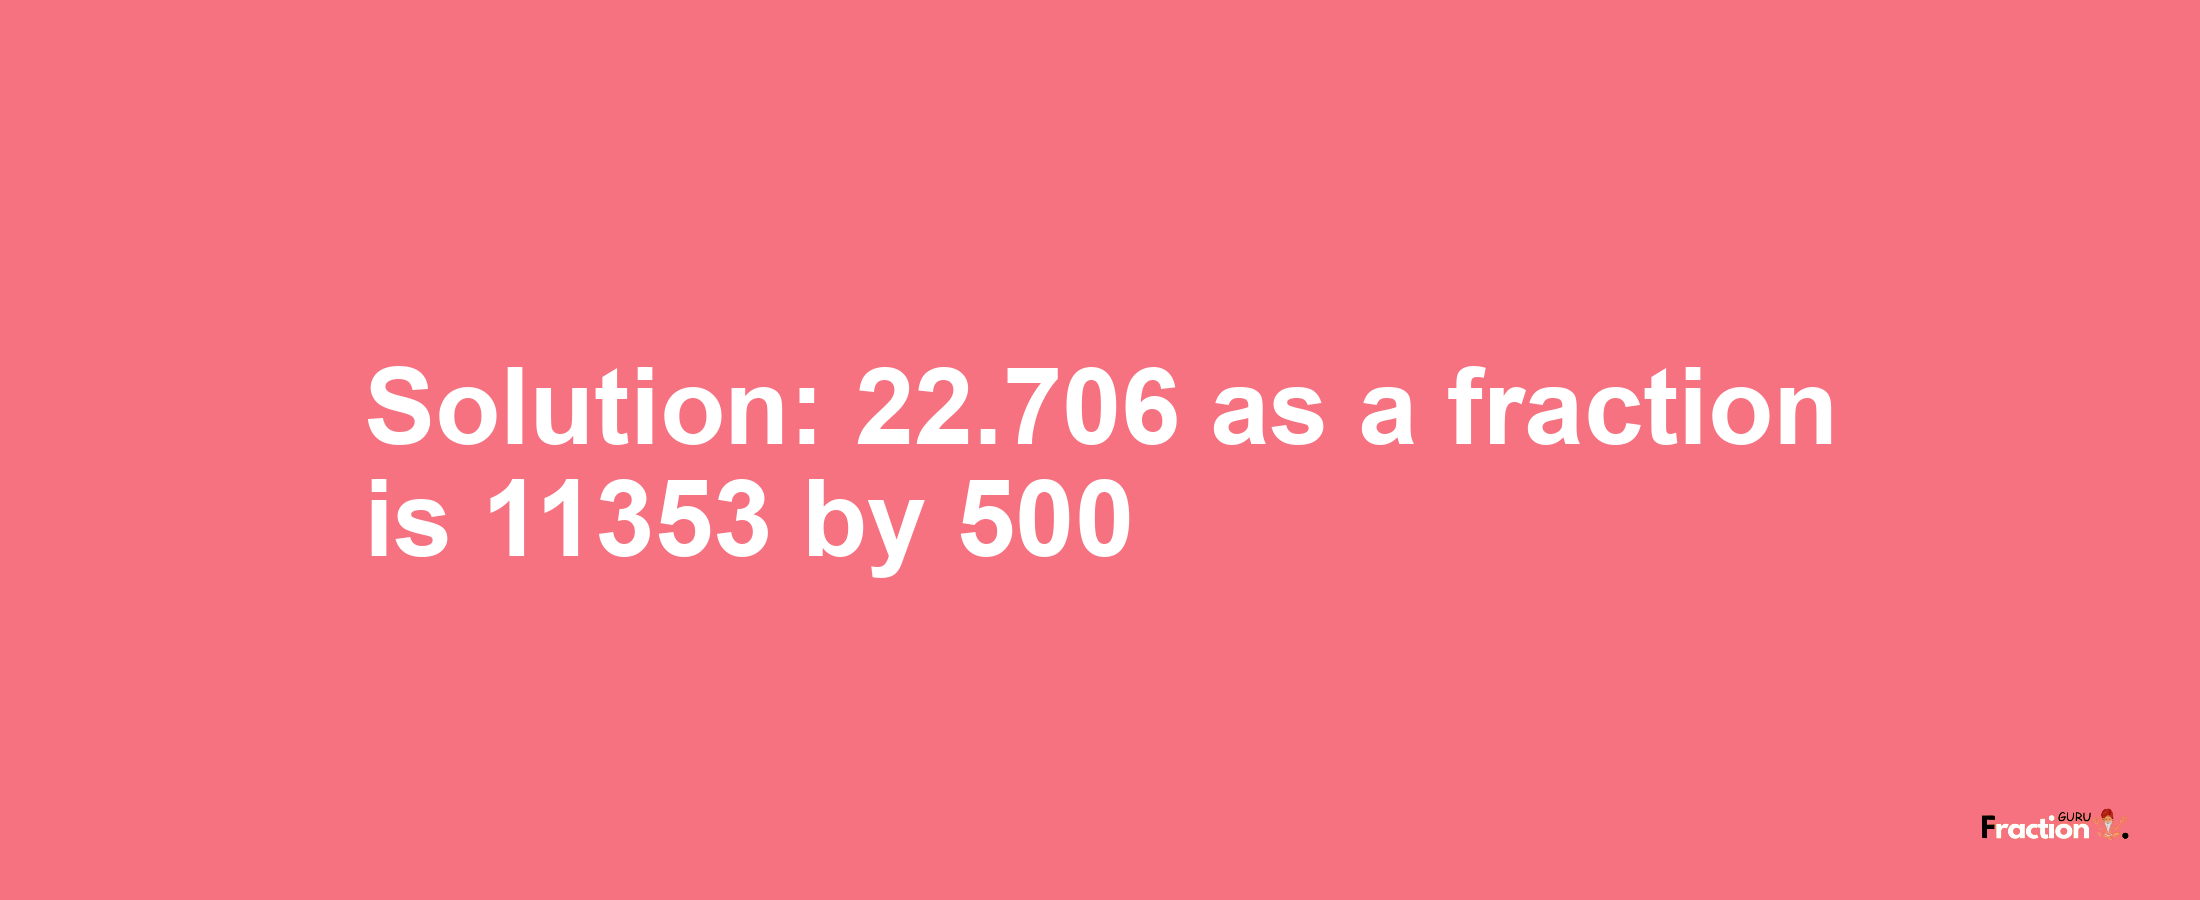 Solution:22.706 as a fraction is 11353/500